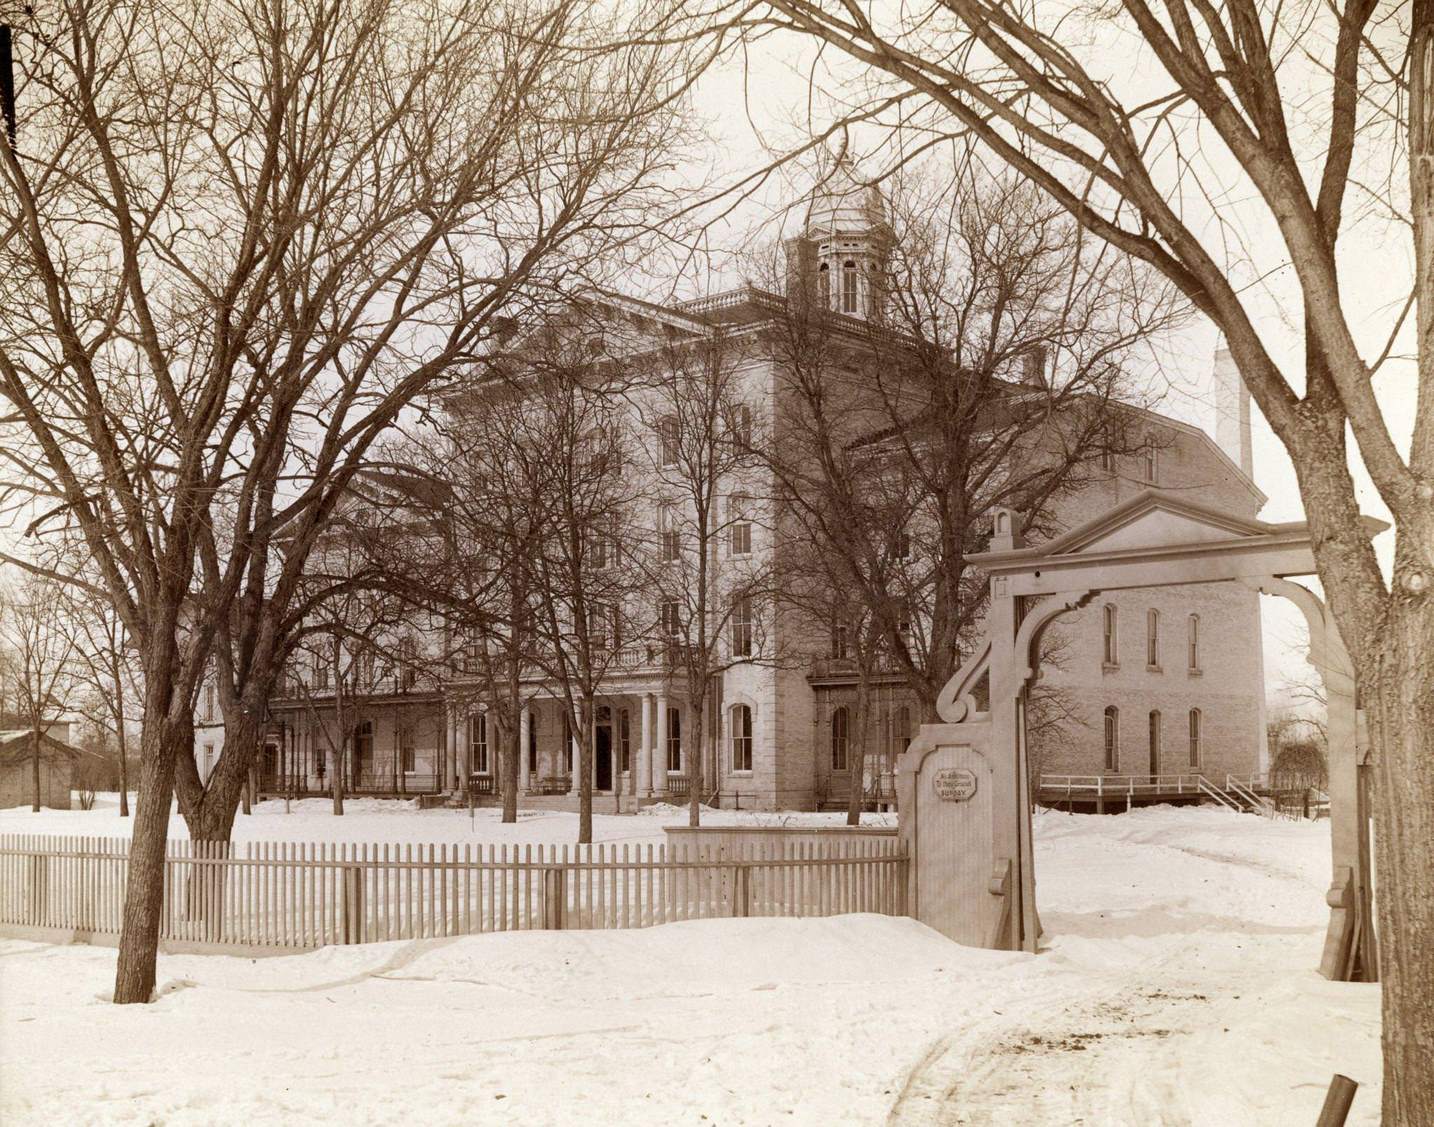 Exterior view in winter of the Wisconsin School for the Blind, Janesville, Wisconsin, 1893.